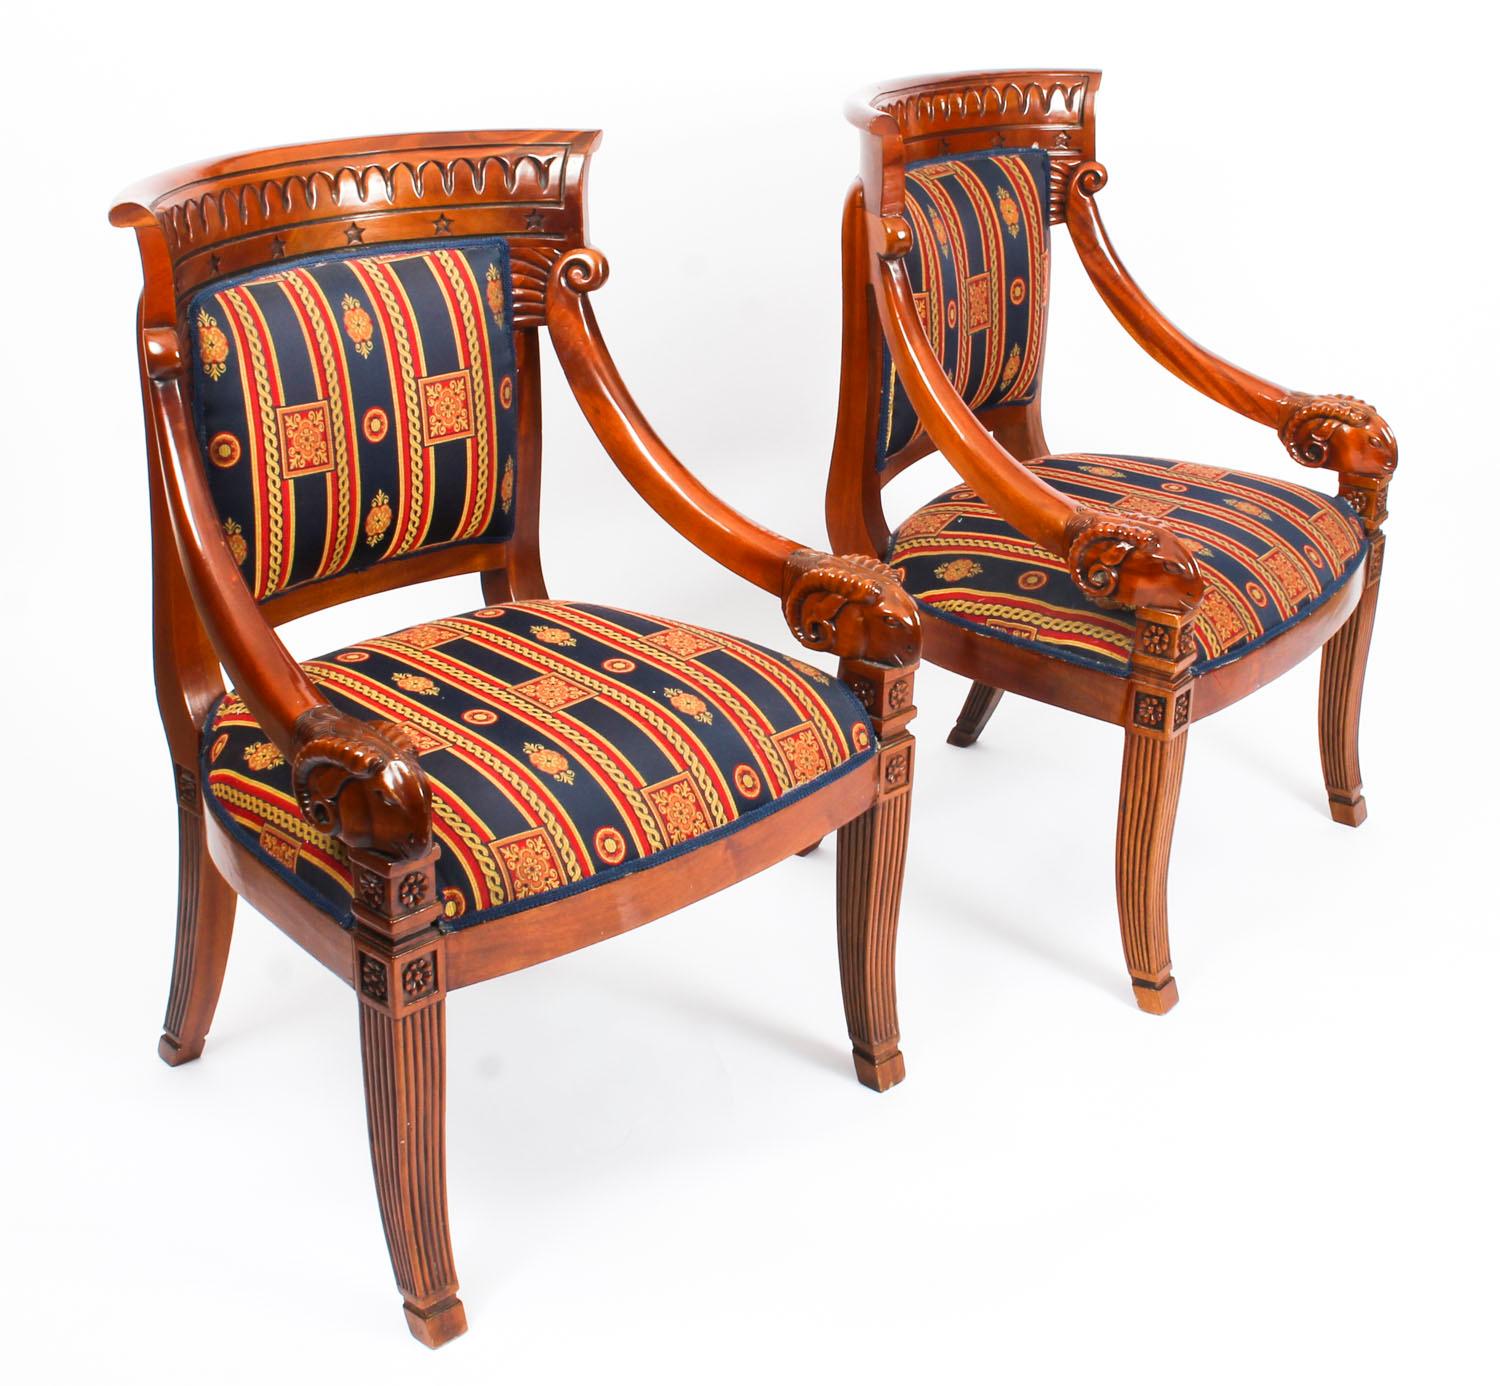 This is a beautiful pair of Empire Revival mahogany armchairs dating from the mid-20th century. 

The mahogany is a beautiful rich colour, the armchairs with upholstered back and seats with scrolling downward swept arms that terminate in carved